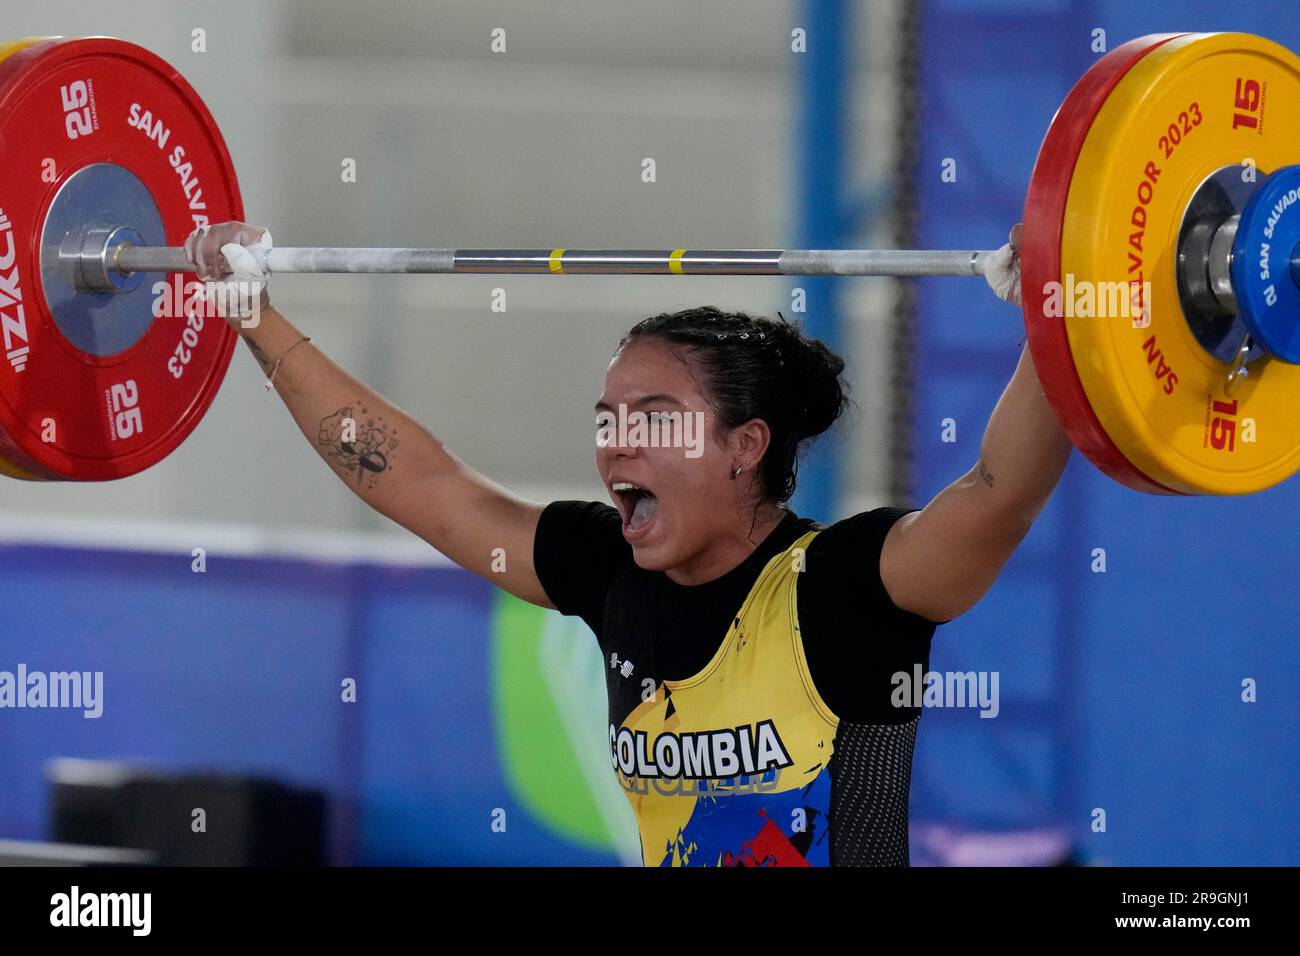 Colombias Hellen Escobar competes in the womens 76kg weightlifting clear and jerk final round of the Central American and Caribbean Games in San Salvador, El Salvador, Monday, June 26, 2023